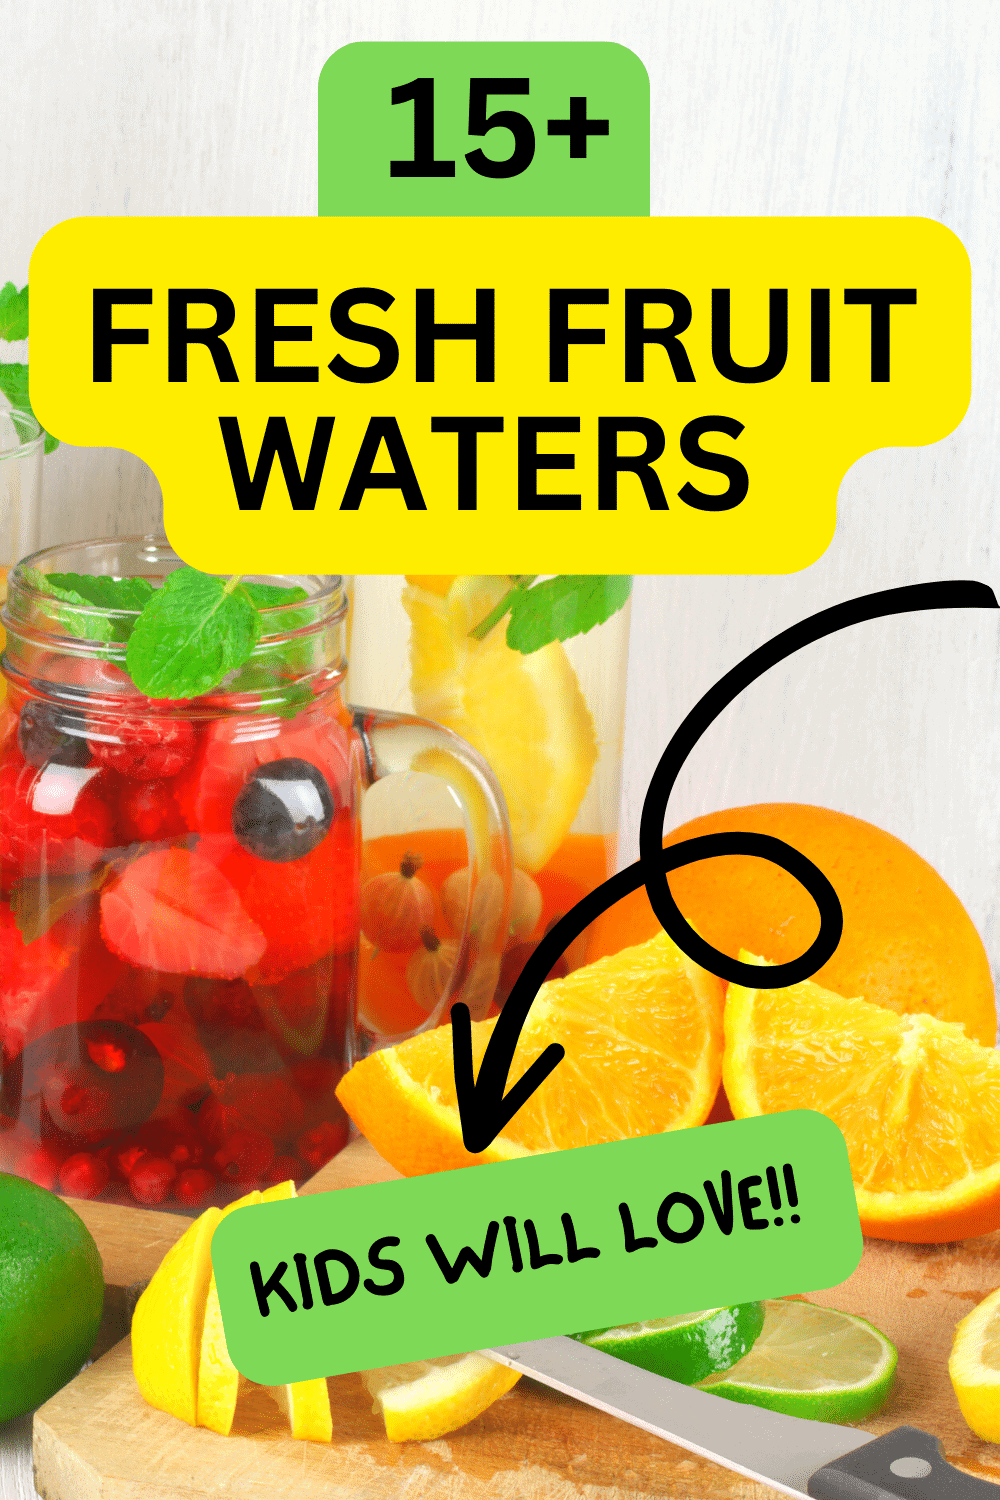 Fruit Water Recipe Ideas For Kids TEXT OVER IMAGES OF FRUIT INFUSED WATERS WITH FRESH FRUIT